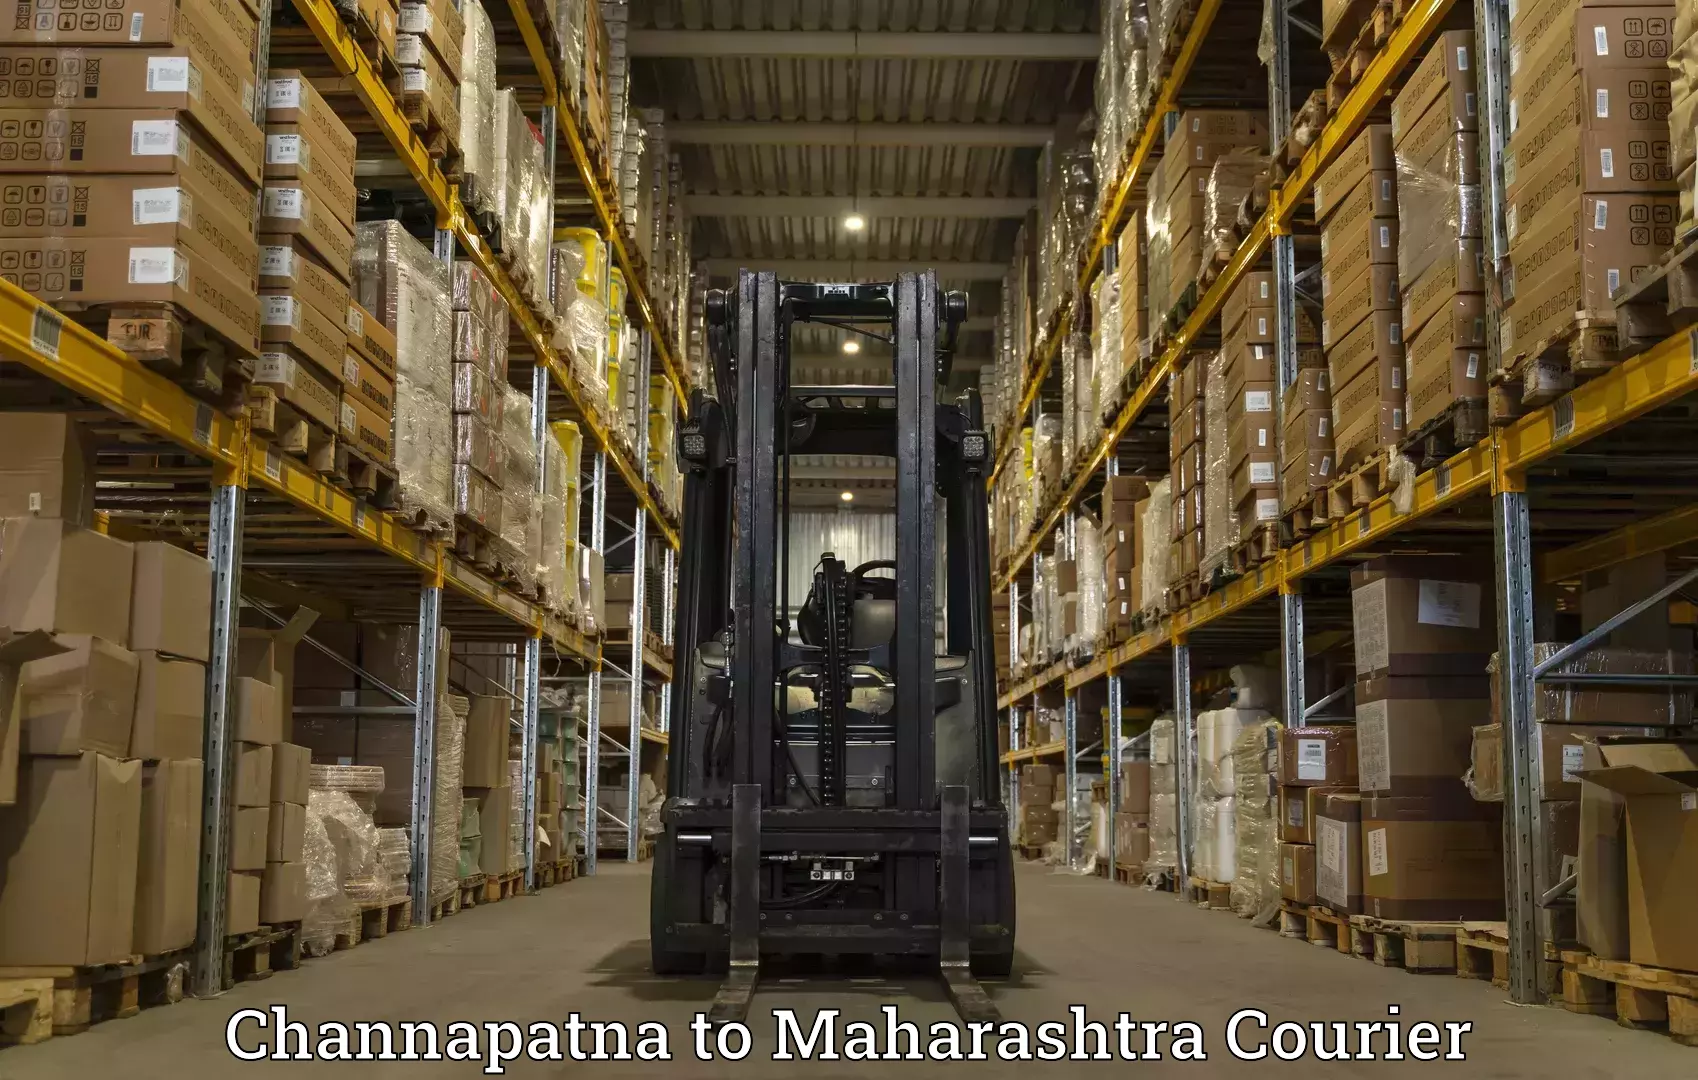 Efficient freight service Channapatna to Chandrapur